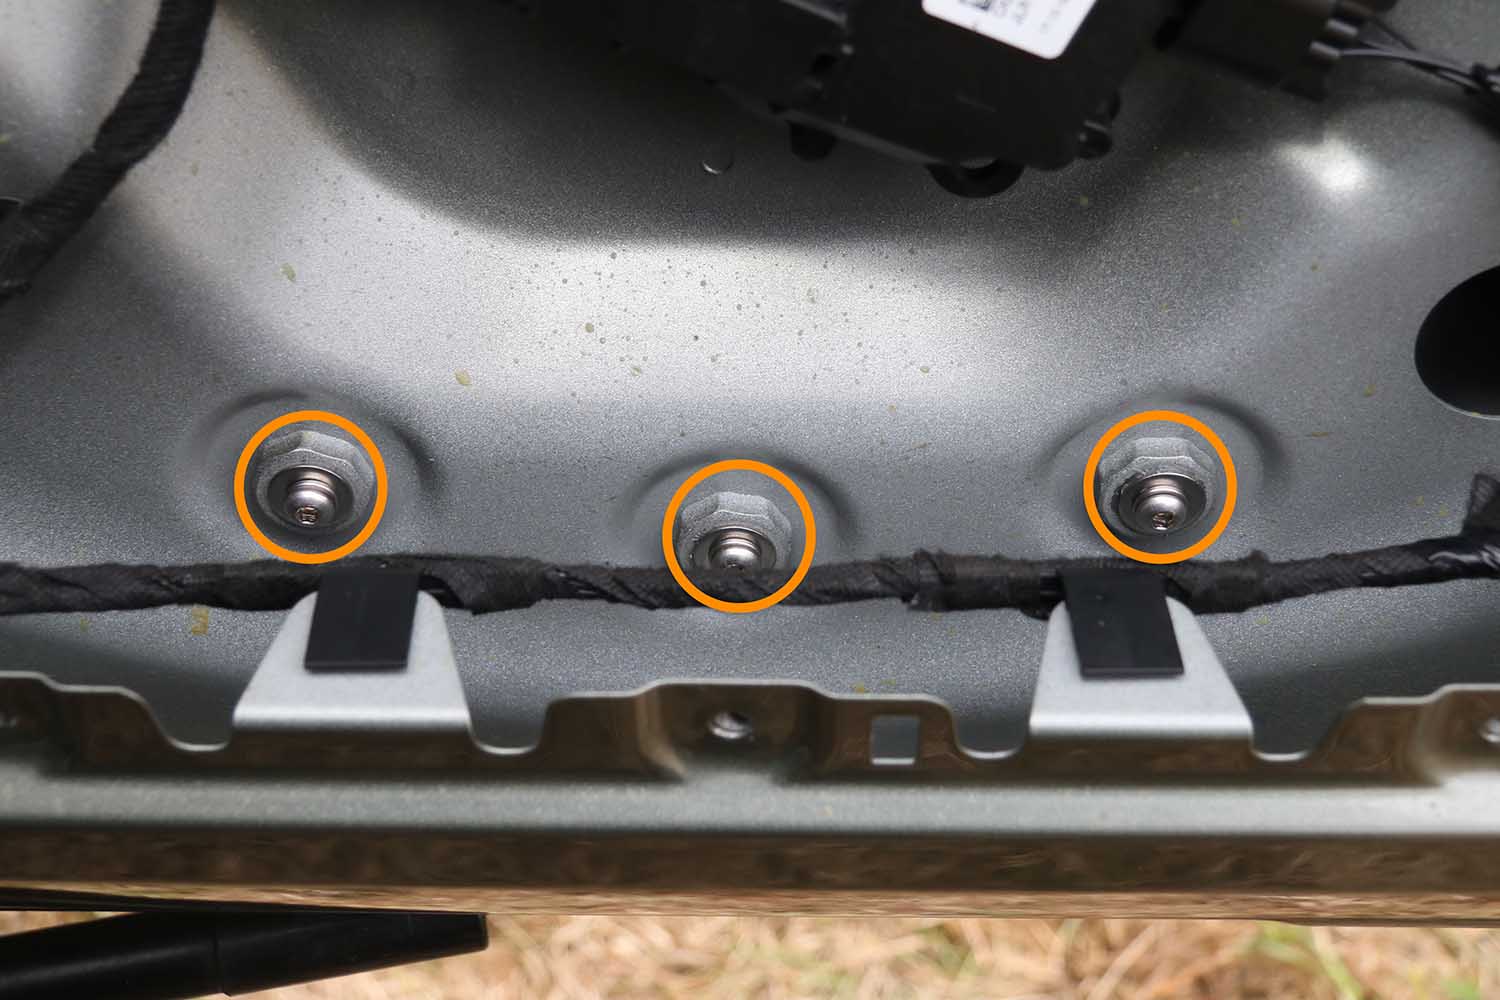 NEW Defender, Rear Door Spare Wheel Bracket Covers (Aluminum) - for Land Rover [L663 from Model Year 2020+]